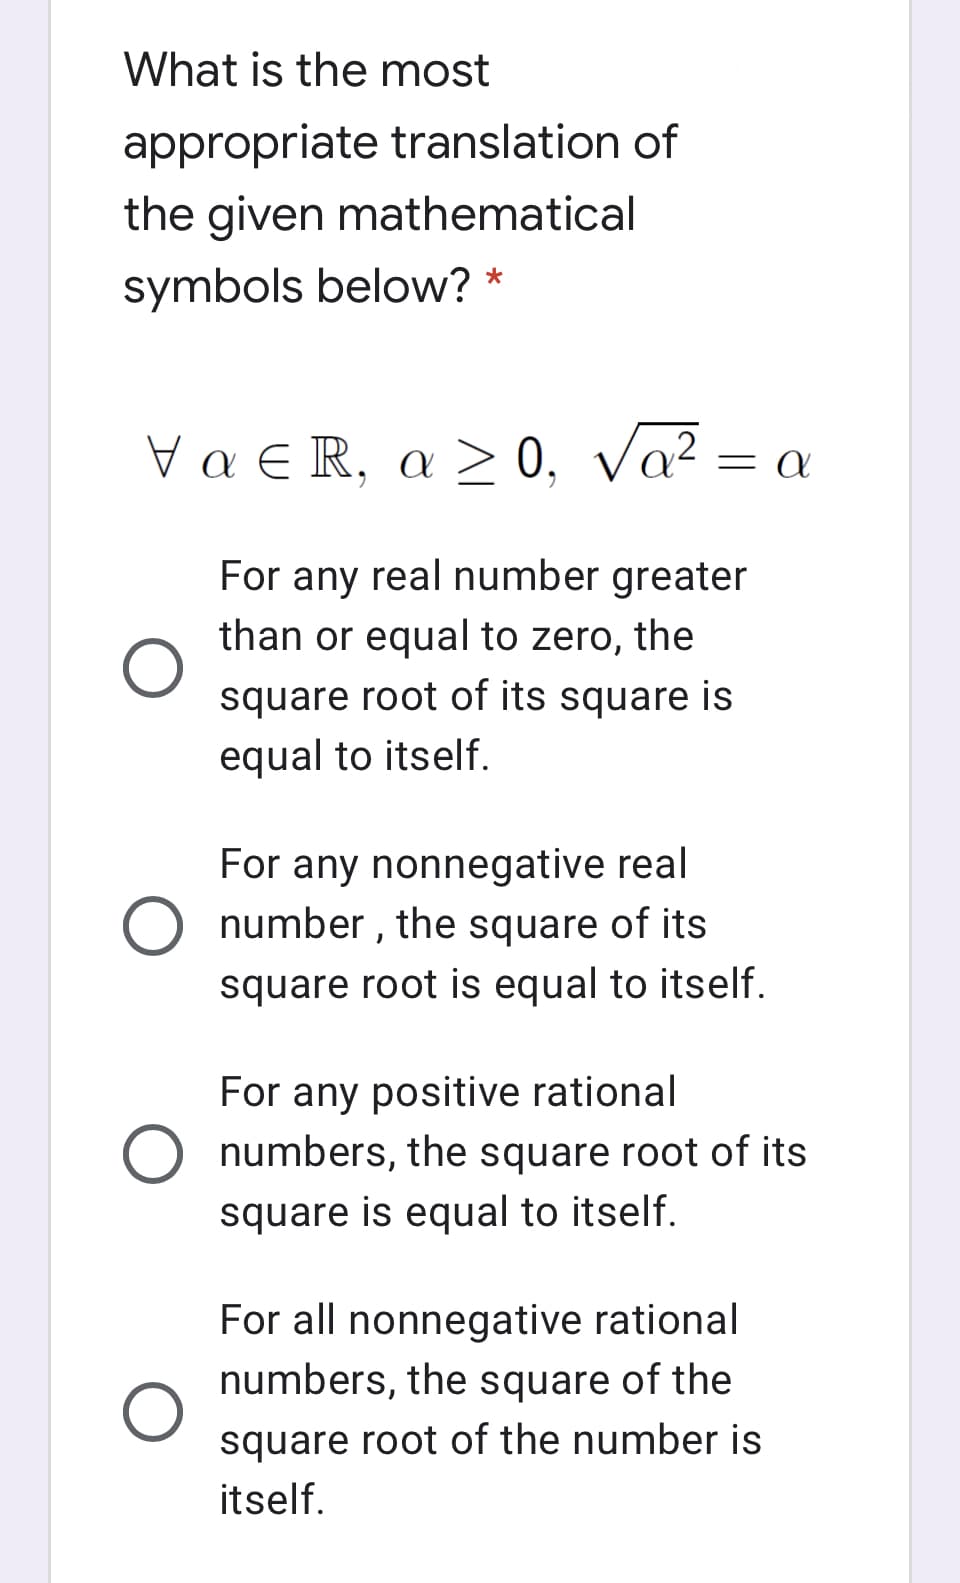 What is the most
appropriate translation of
the given mathematical
symbols below? *
Vα R, α > 0, να2
= A
For any real number greater
than or equal to zero, the
square root of its square is
equal to itself.
For any nonnegative real
O number , the square of its
square root is equal to itself.
For any positive rational
O numbers, the square root of its
square is equal to itself.
For all nonnegative rational
numbers, the square of the
square root of the number is
itself.
